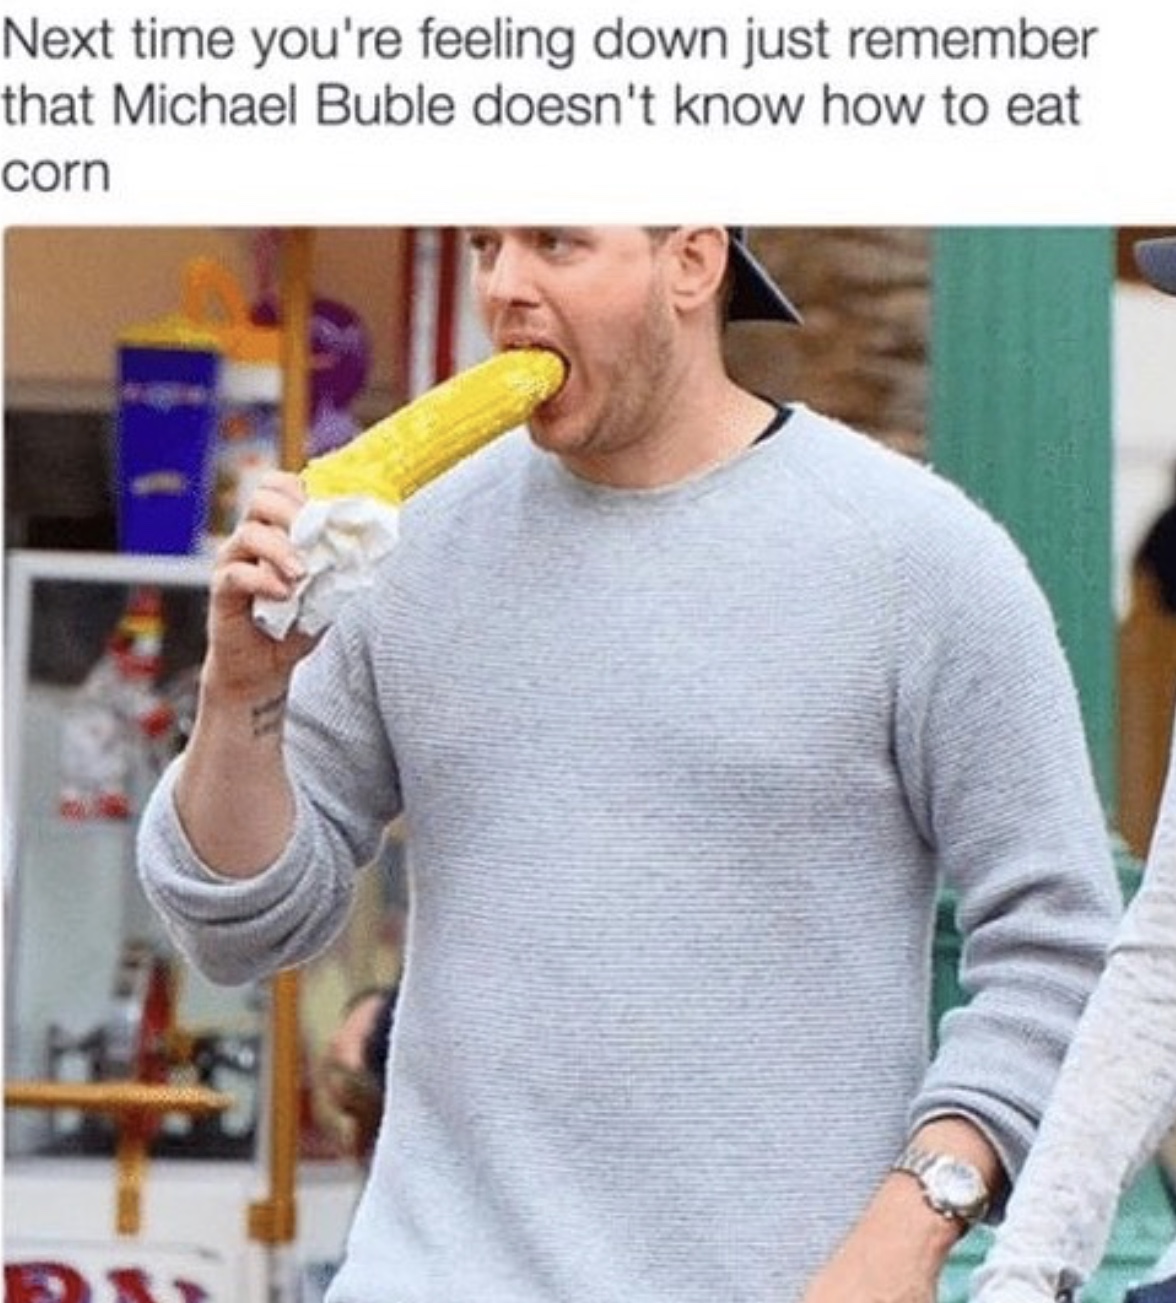 funny meme of Michael Buble eating corn on the cob wrongly